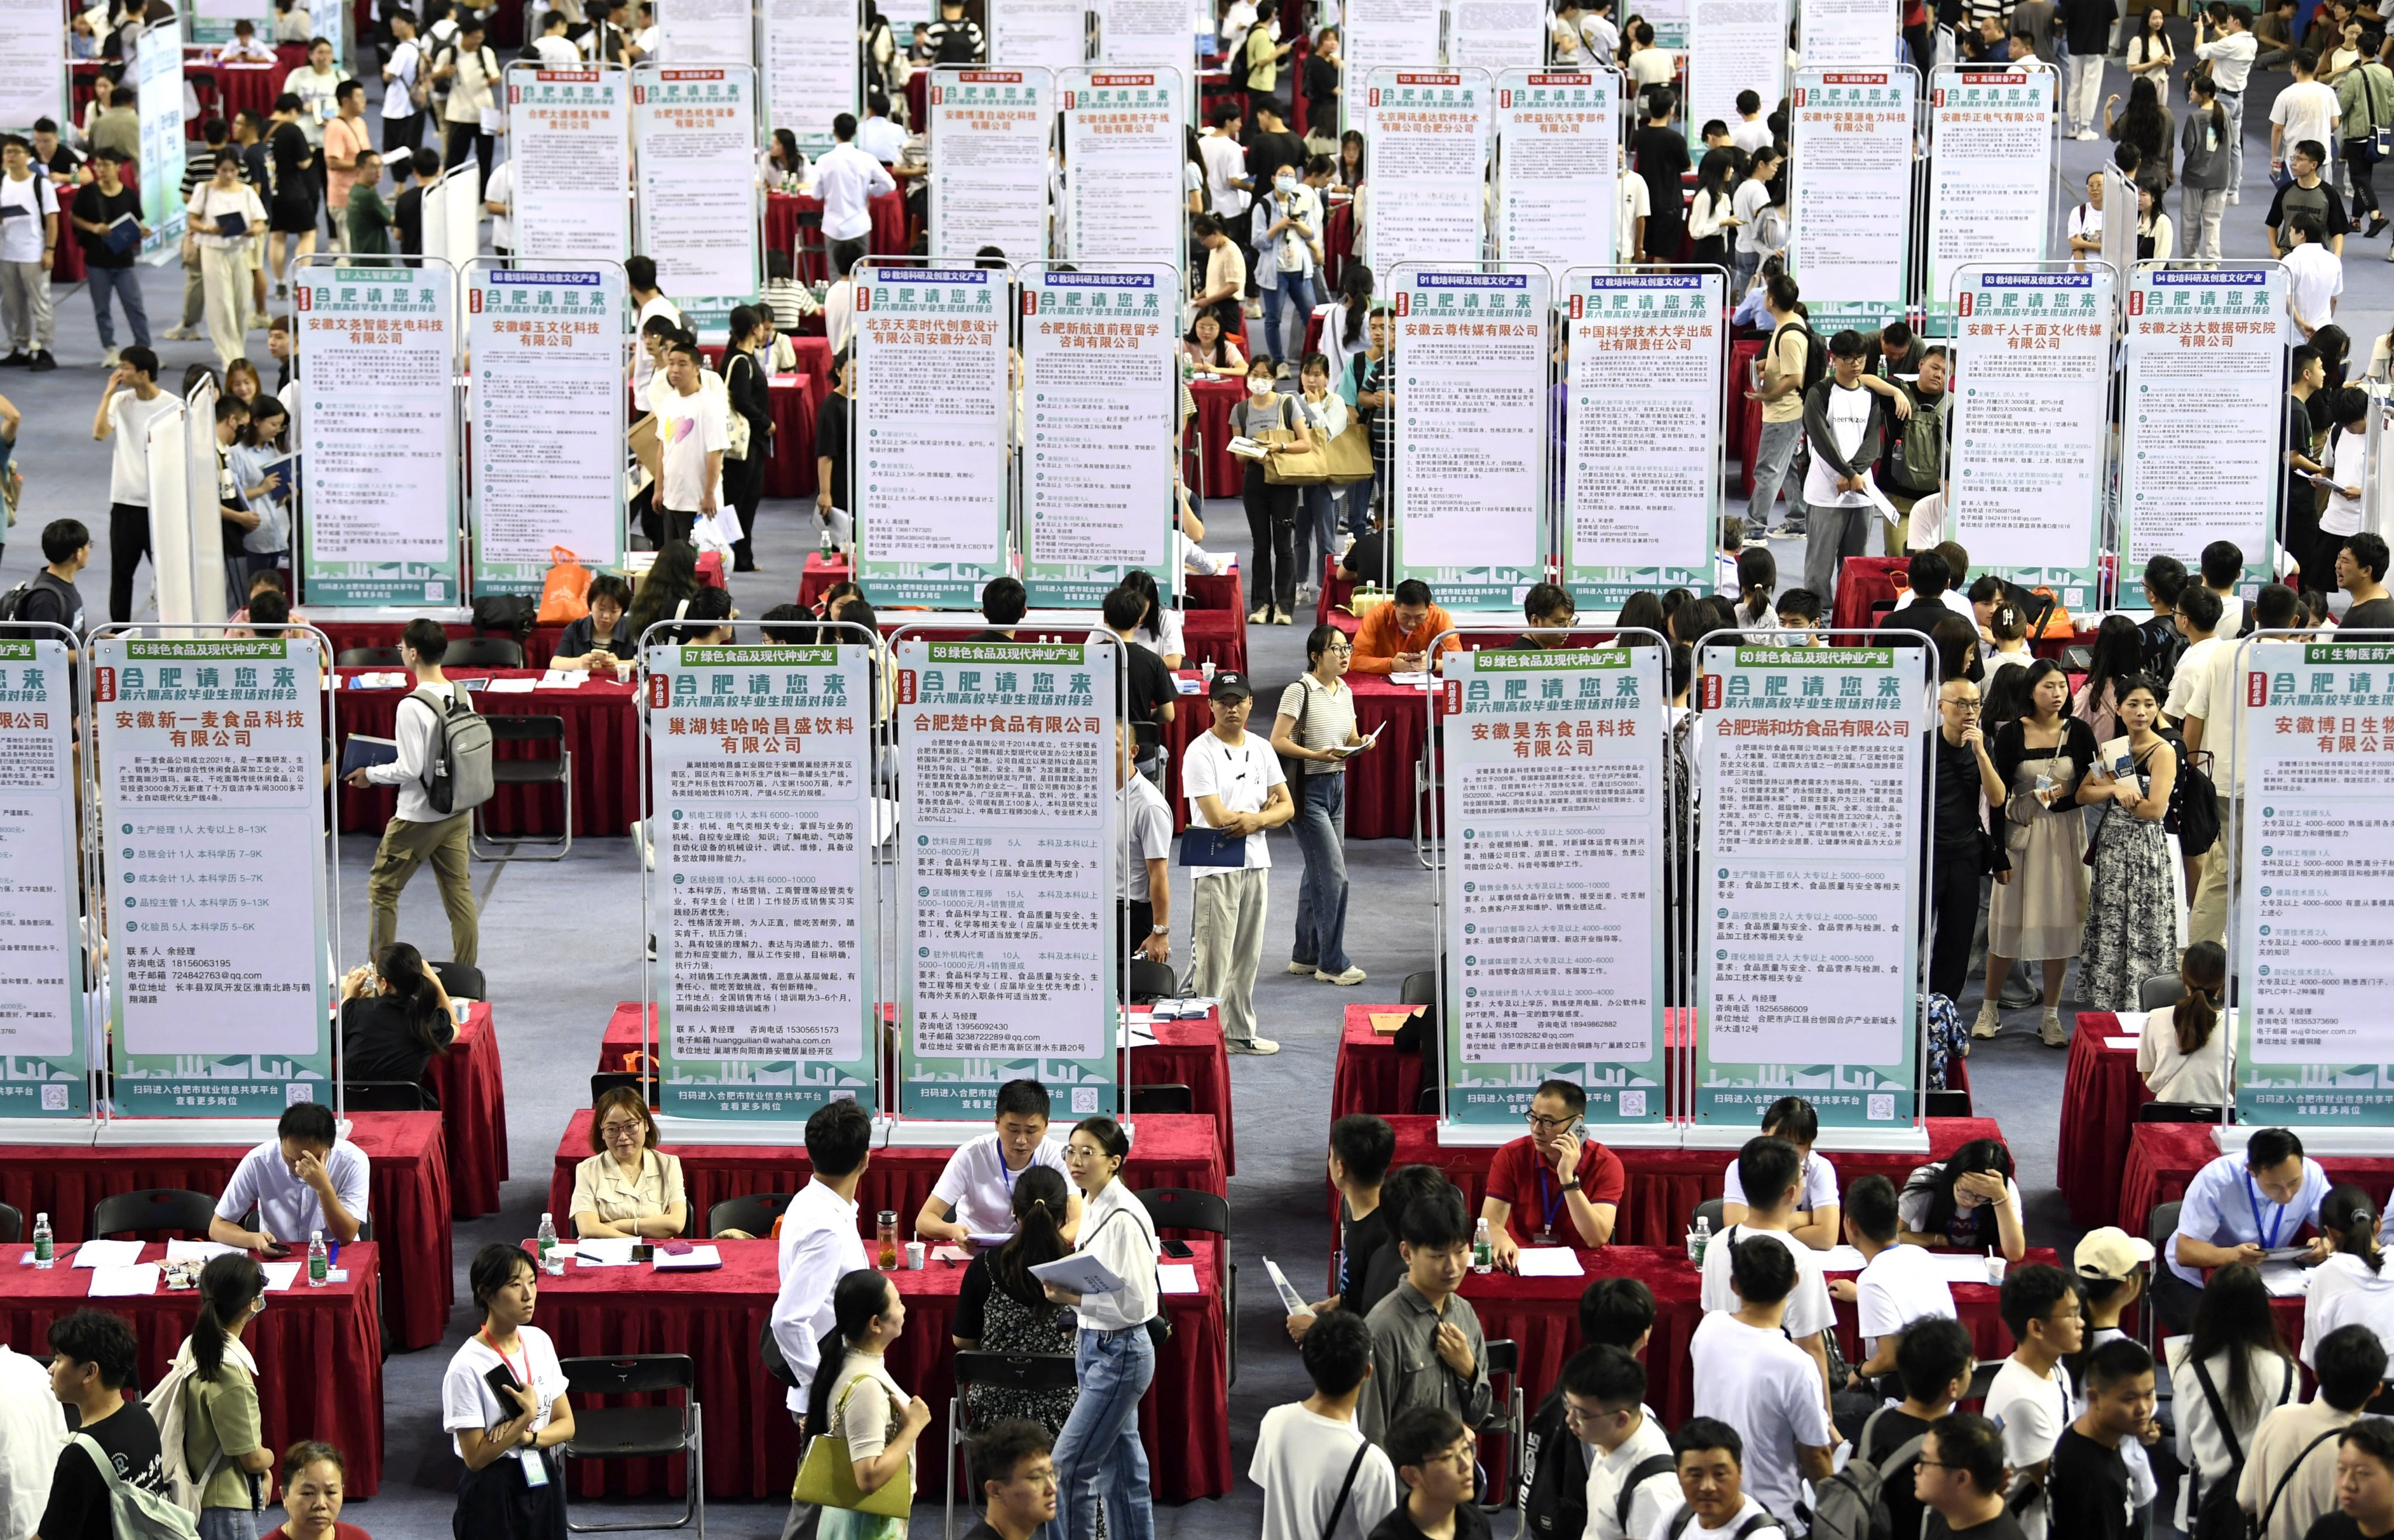 A job fair for university graduates in Hefei, Anhui province in China. Photo: China Daily via Reuters